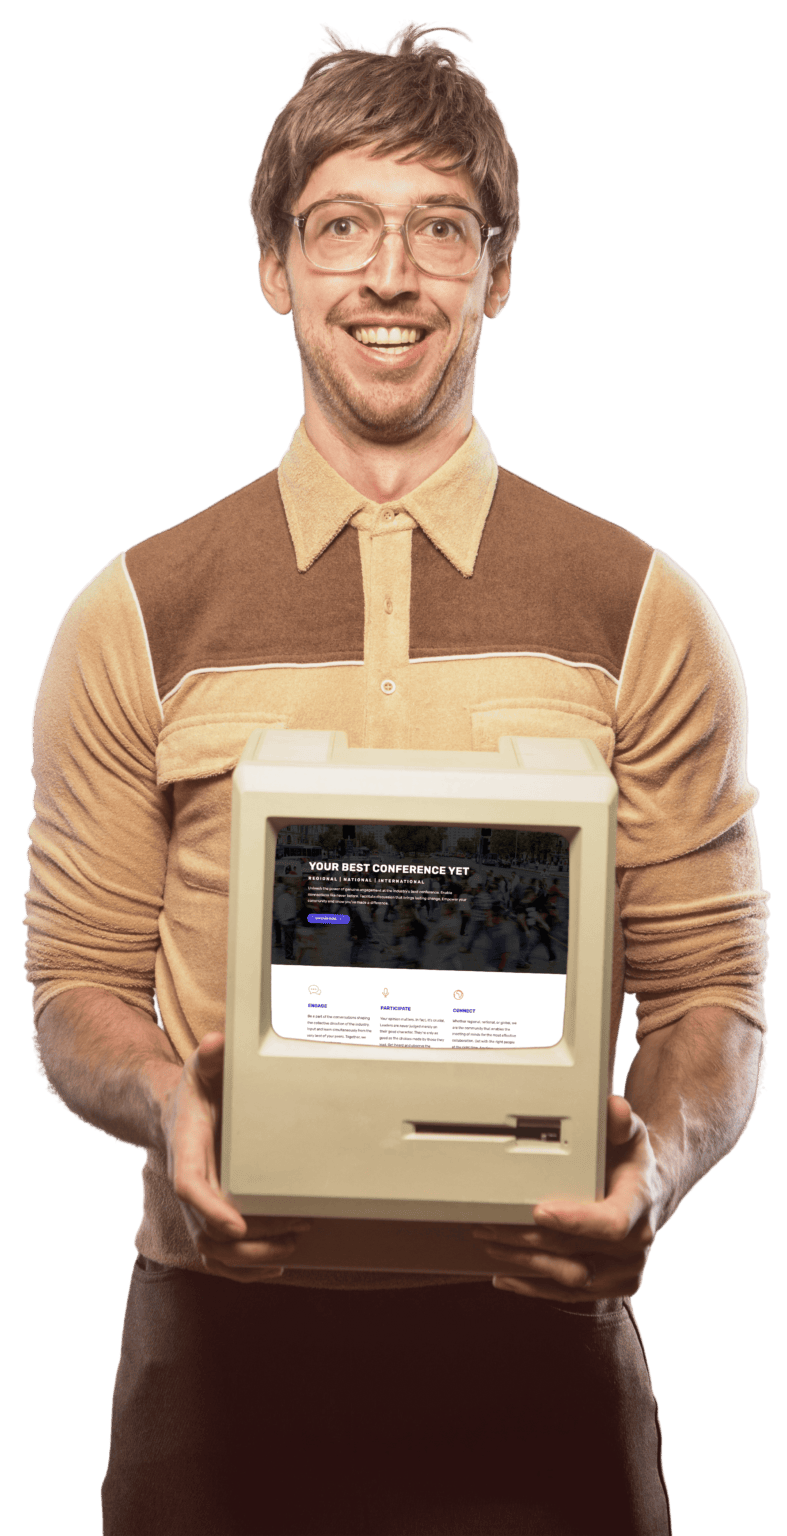 Man holding a vintage Apple Macintosh with a screen showing Event Engine.